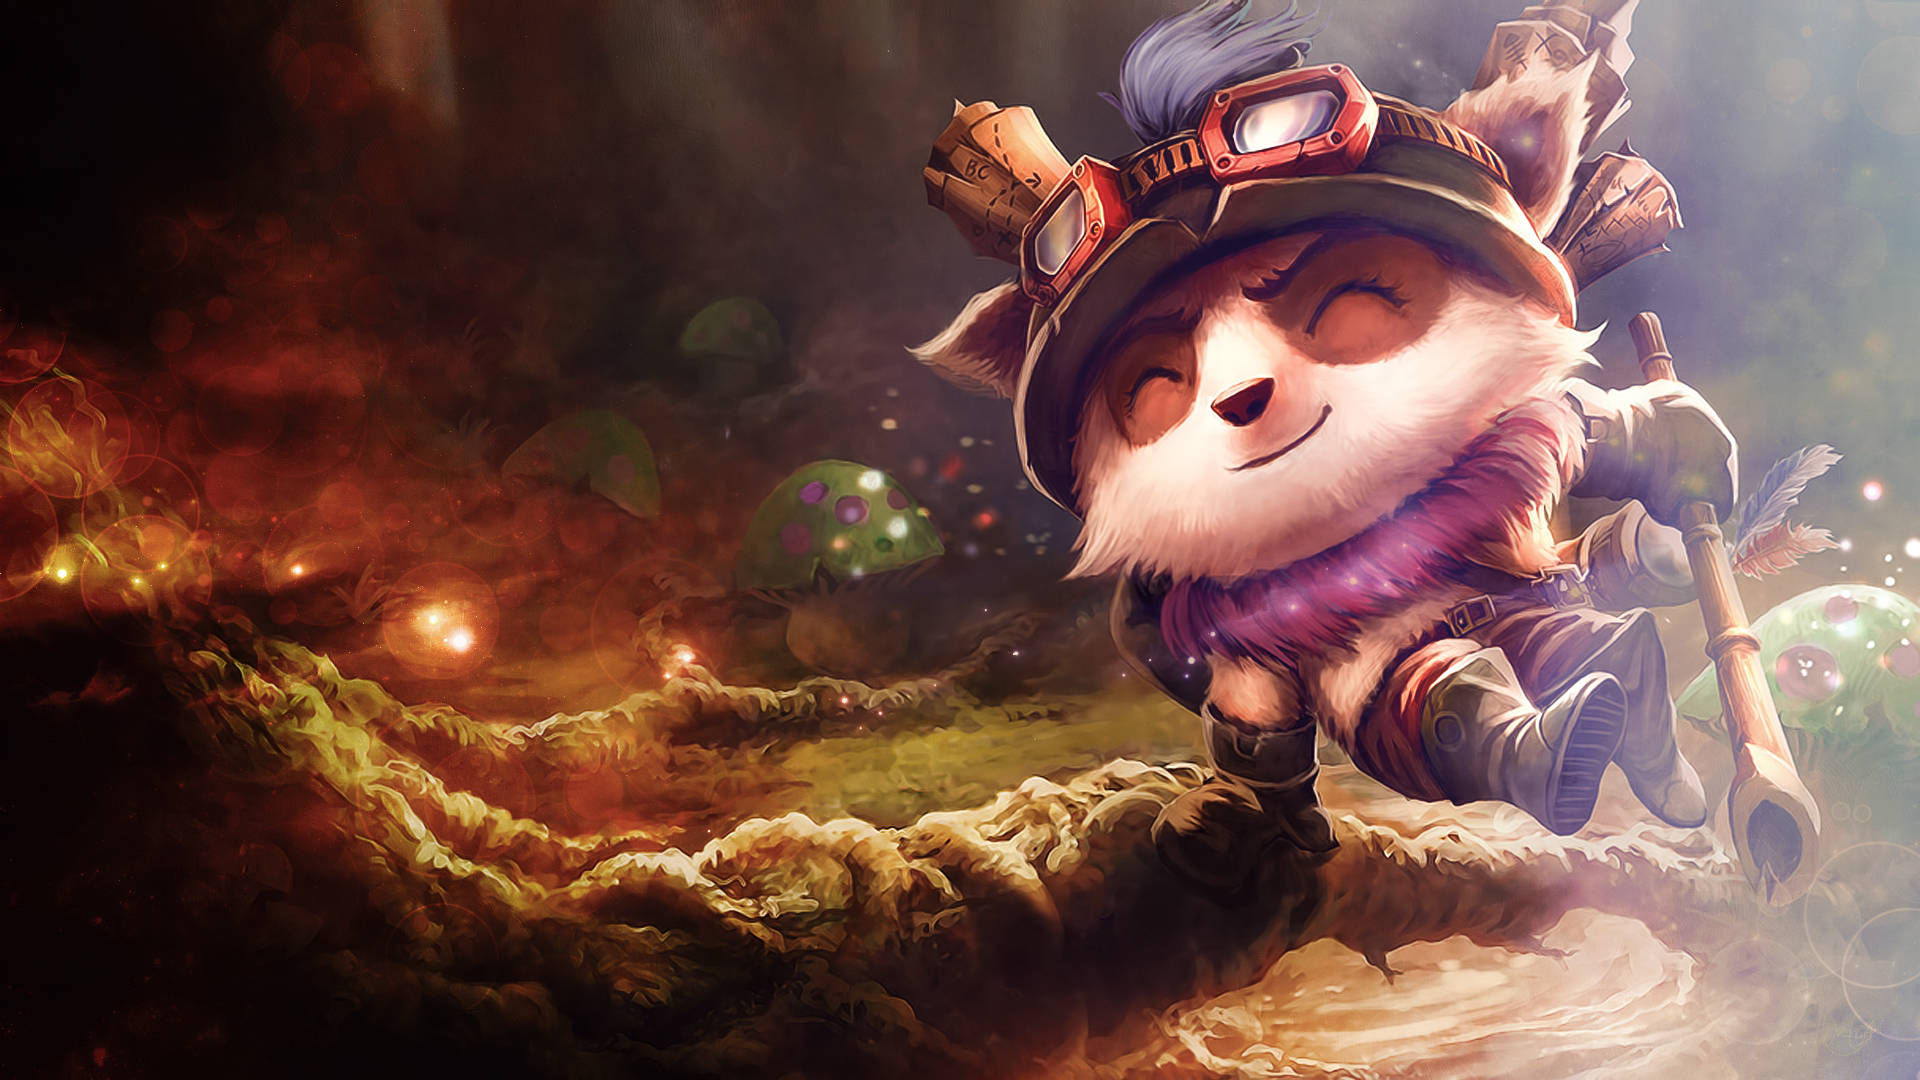 3D League of Legends Characters Ready to Engage in Epic Battles Wallpaper